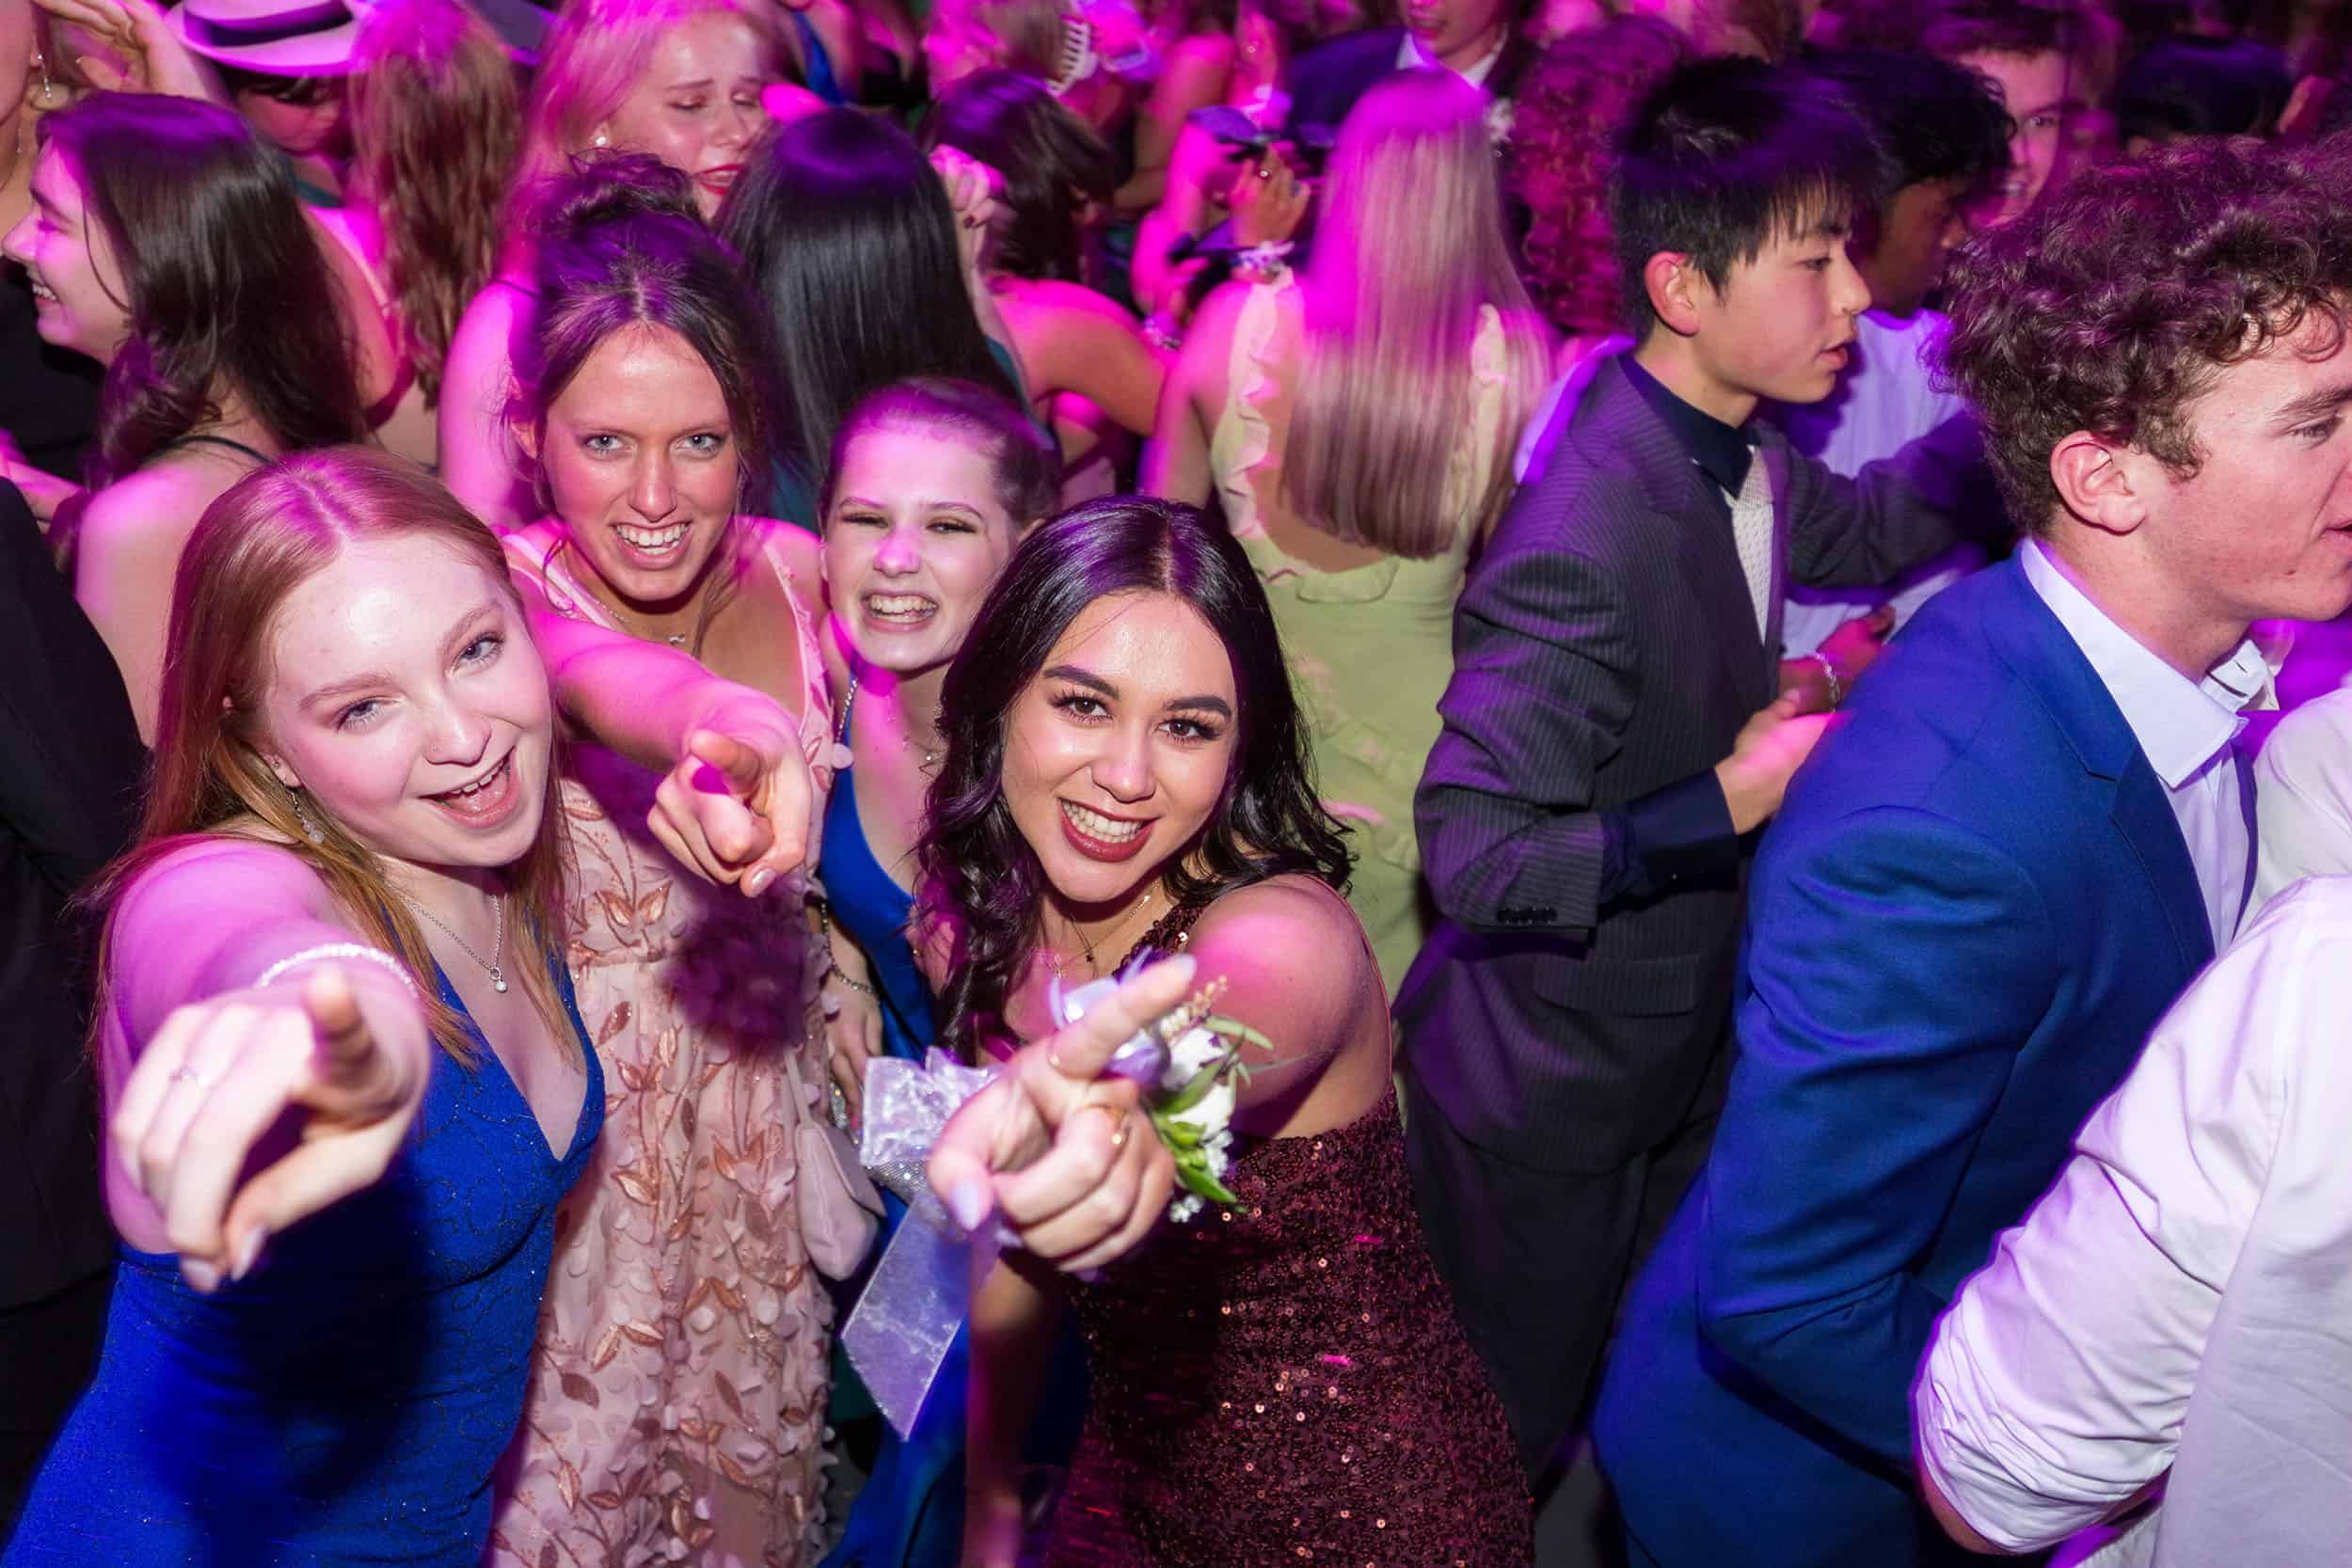 Slow sync flash used to capture students having fun on the dance floor at their school formal.